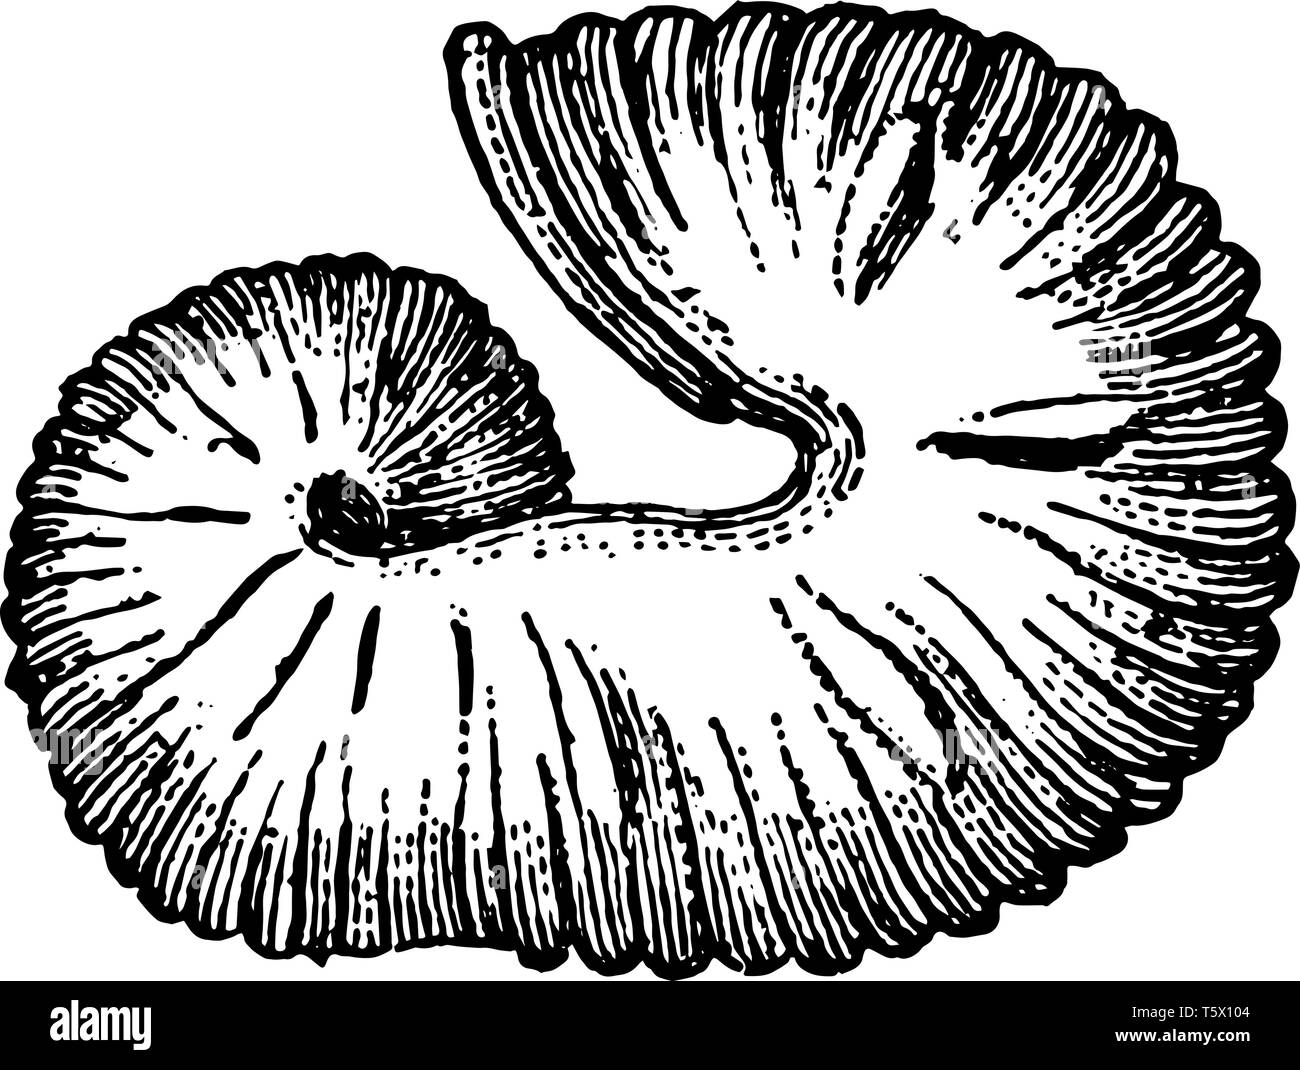 Extinct Cephalopod Fossil Scaphites equalis is a species of extinct cephalopods that thrived during the Cretaceous period vintage line drawing or engr Stock Vector